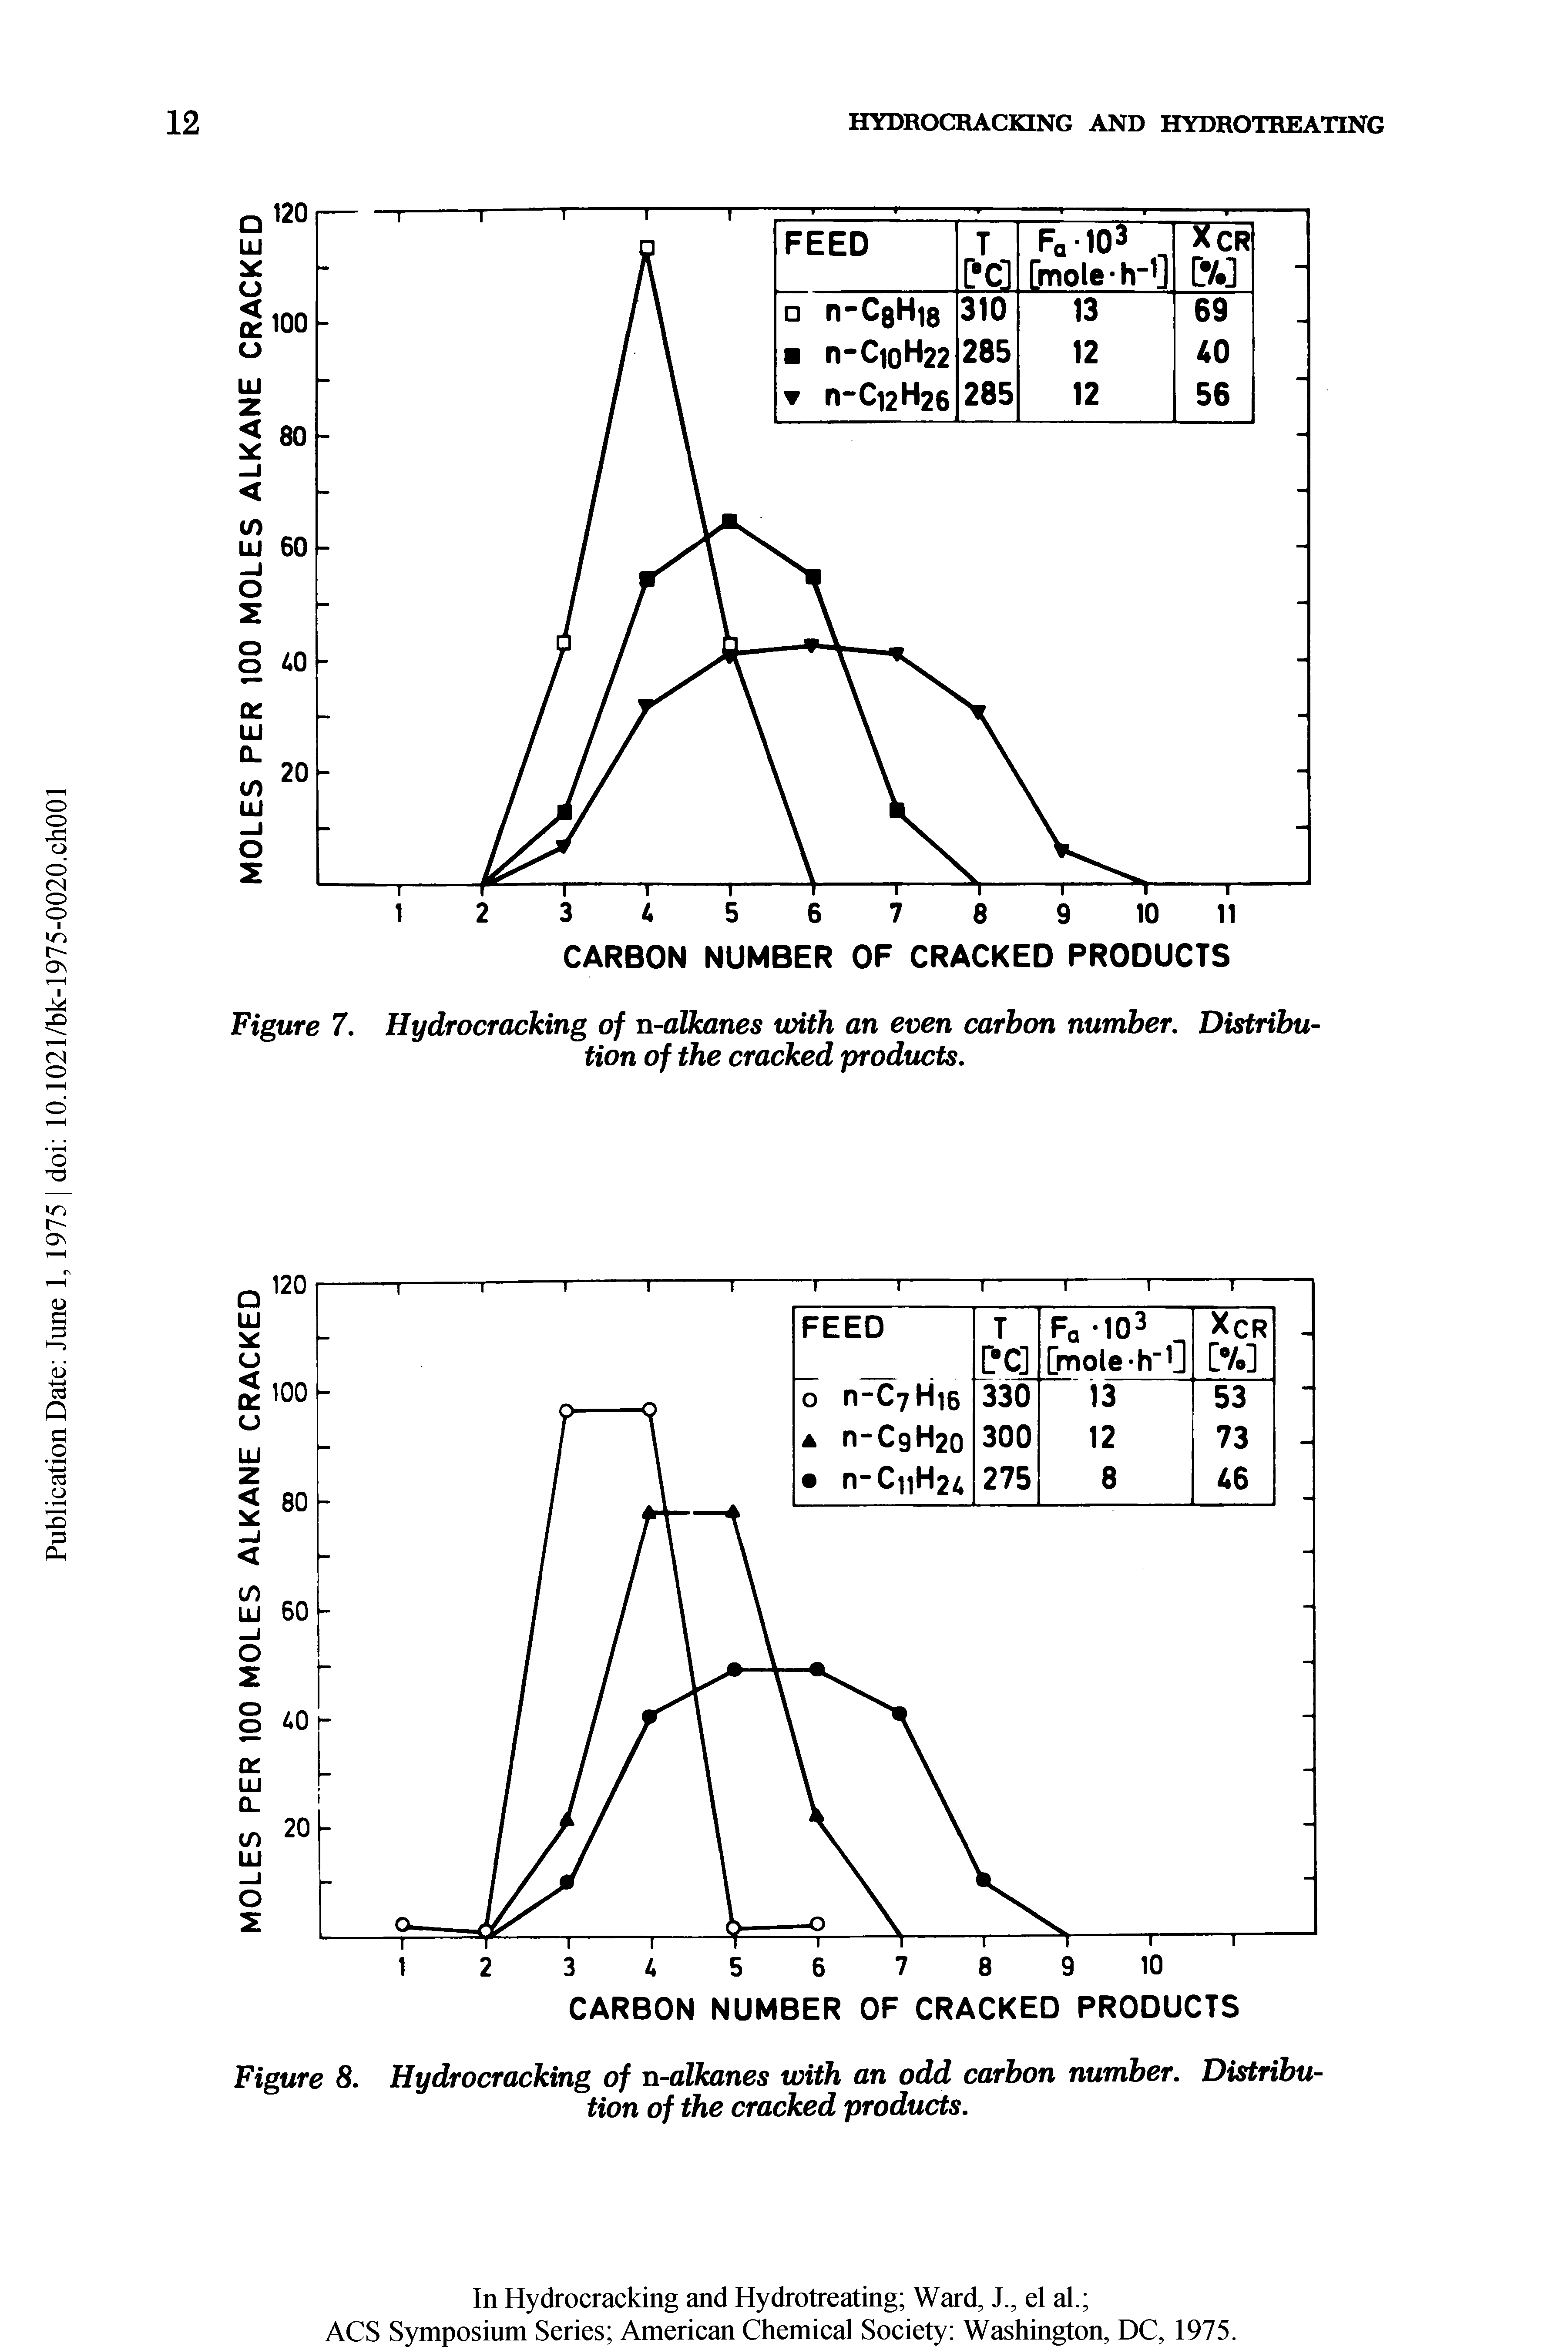 Figure 7. Hydrocracking of n-alkanes with an even carbon number. Distribution of the cracked products.